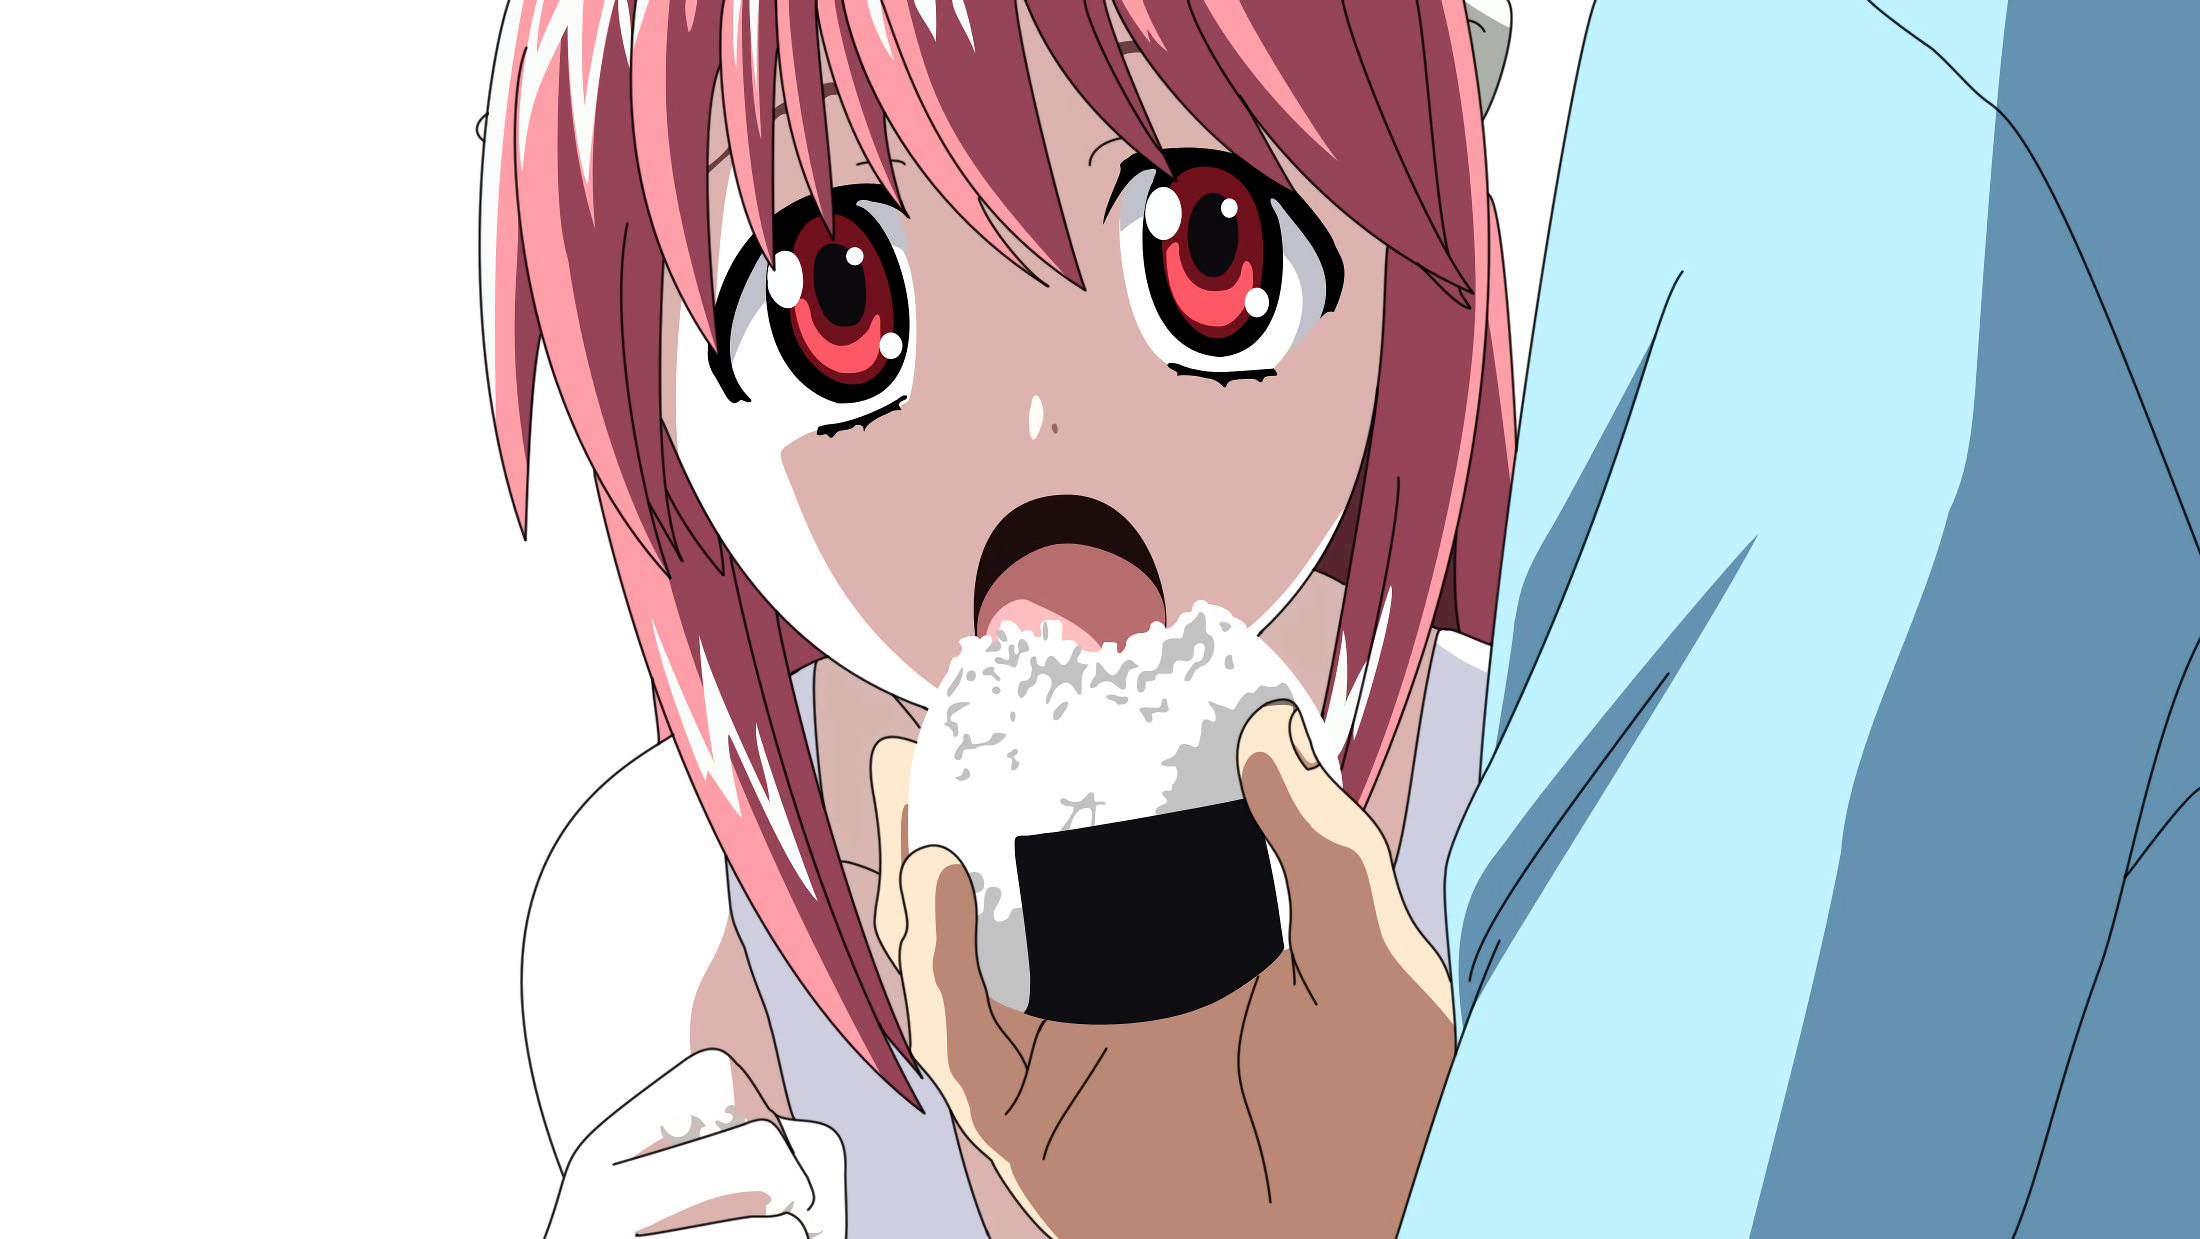 Anime character Lucy from Elfen Lied with captivating expression.